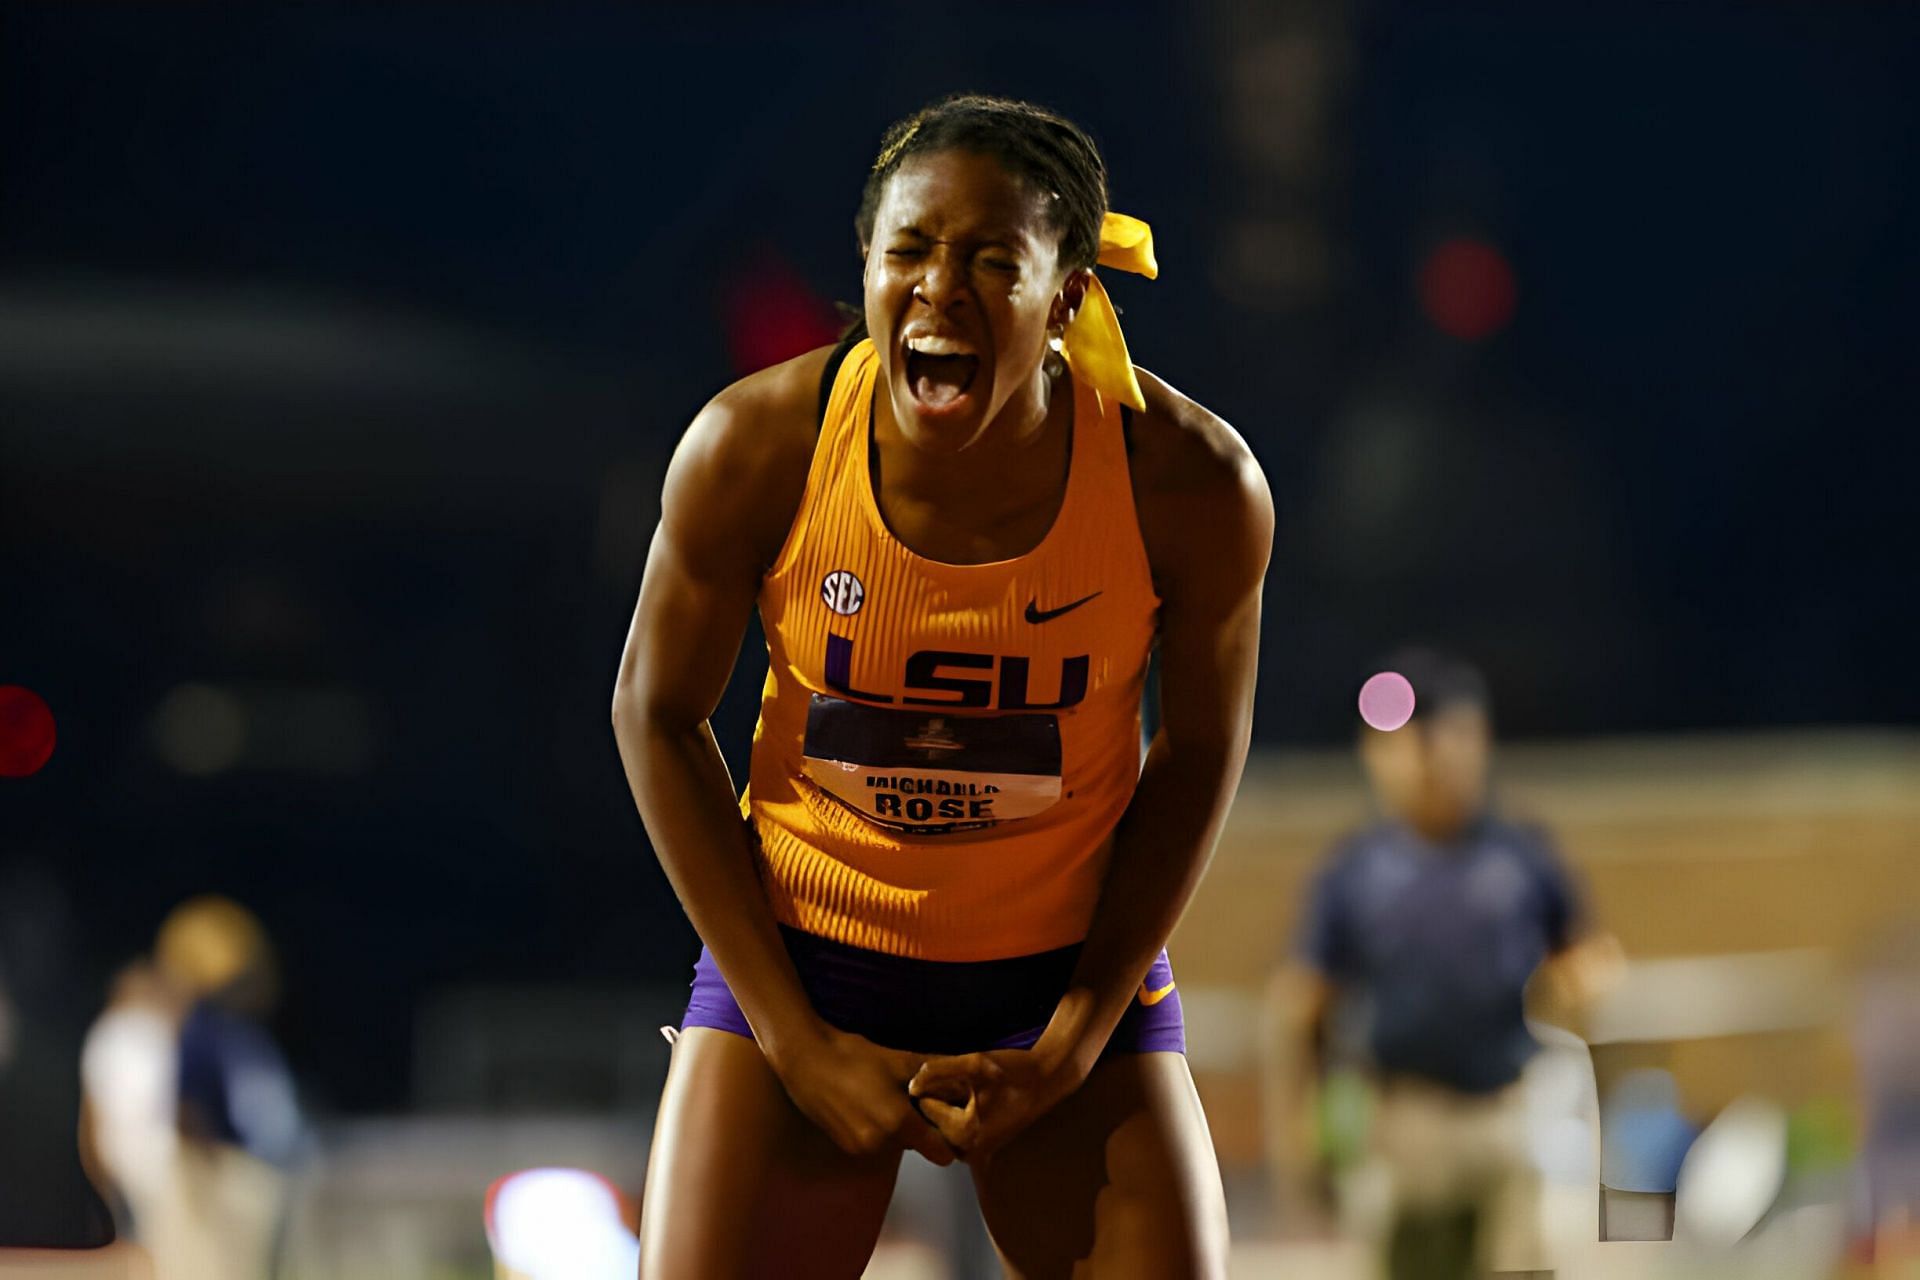 Michaela Rose is a promising track star who recently shattered the 600m collegiate record.